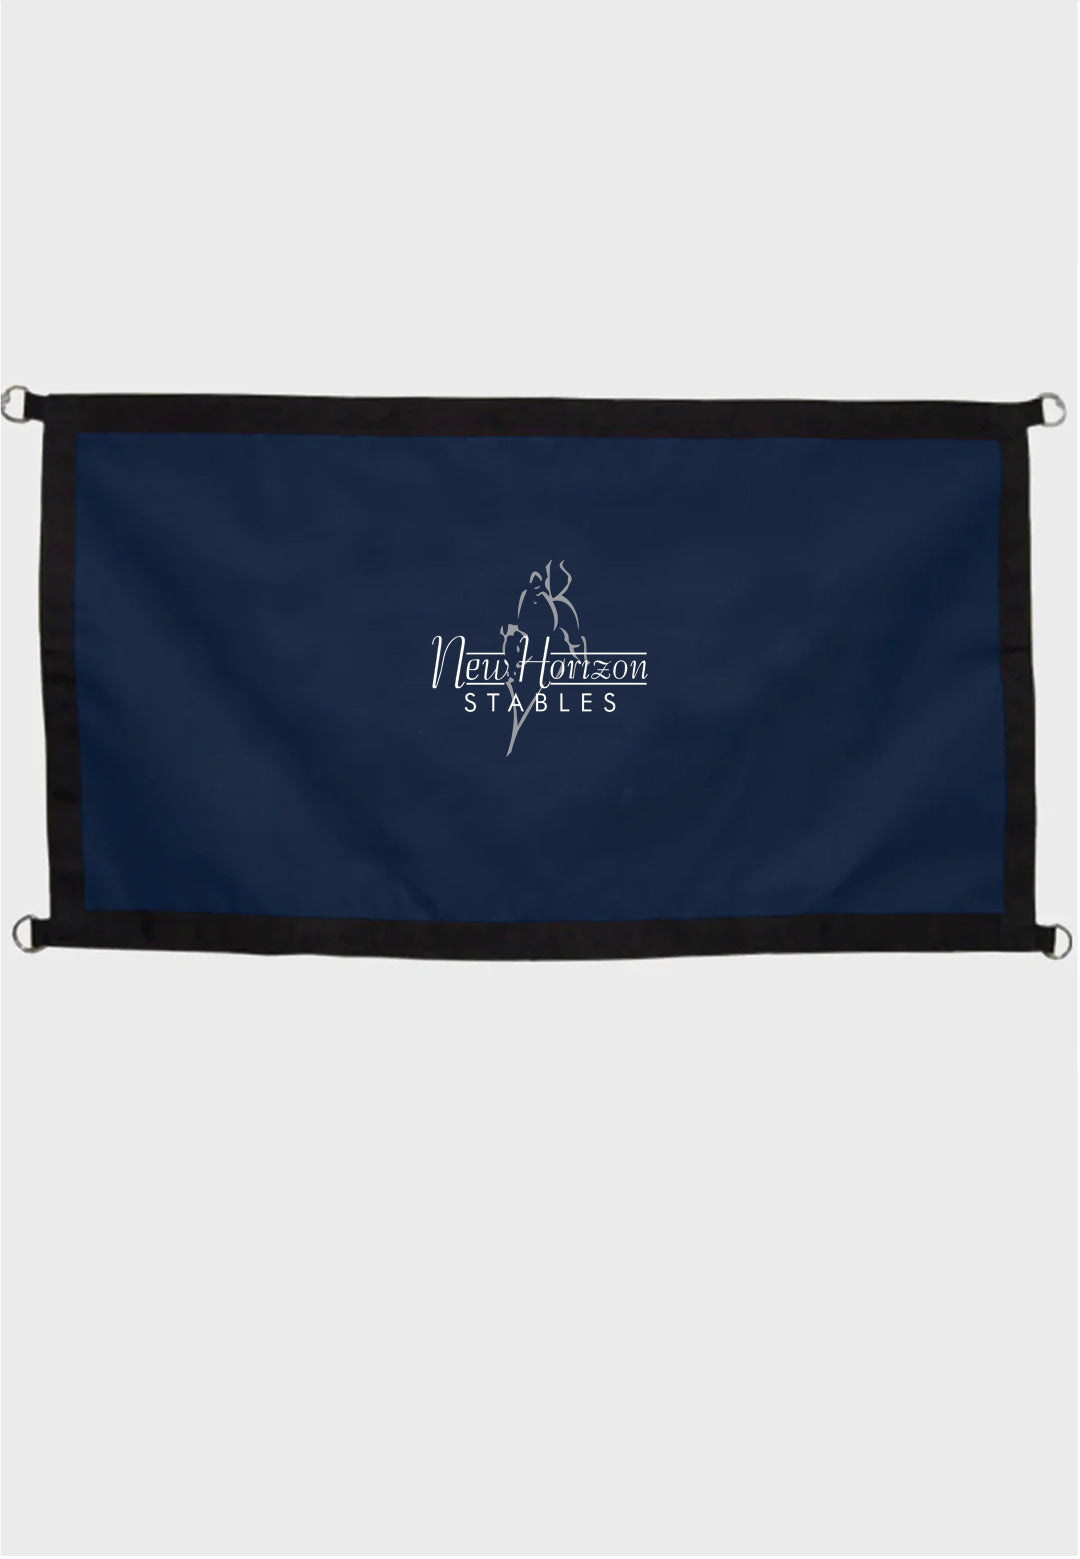 New Horizon Stables World Class Equine Stall Guard - Navy